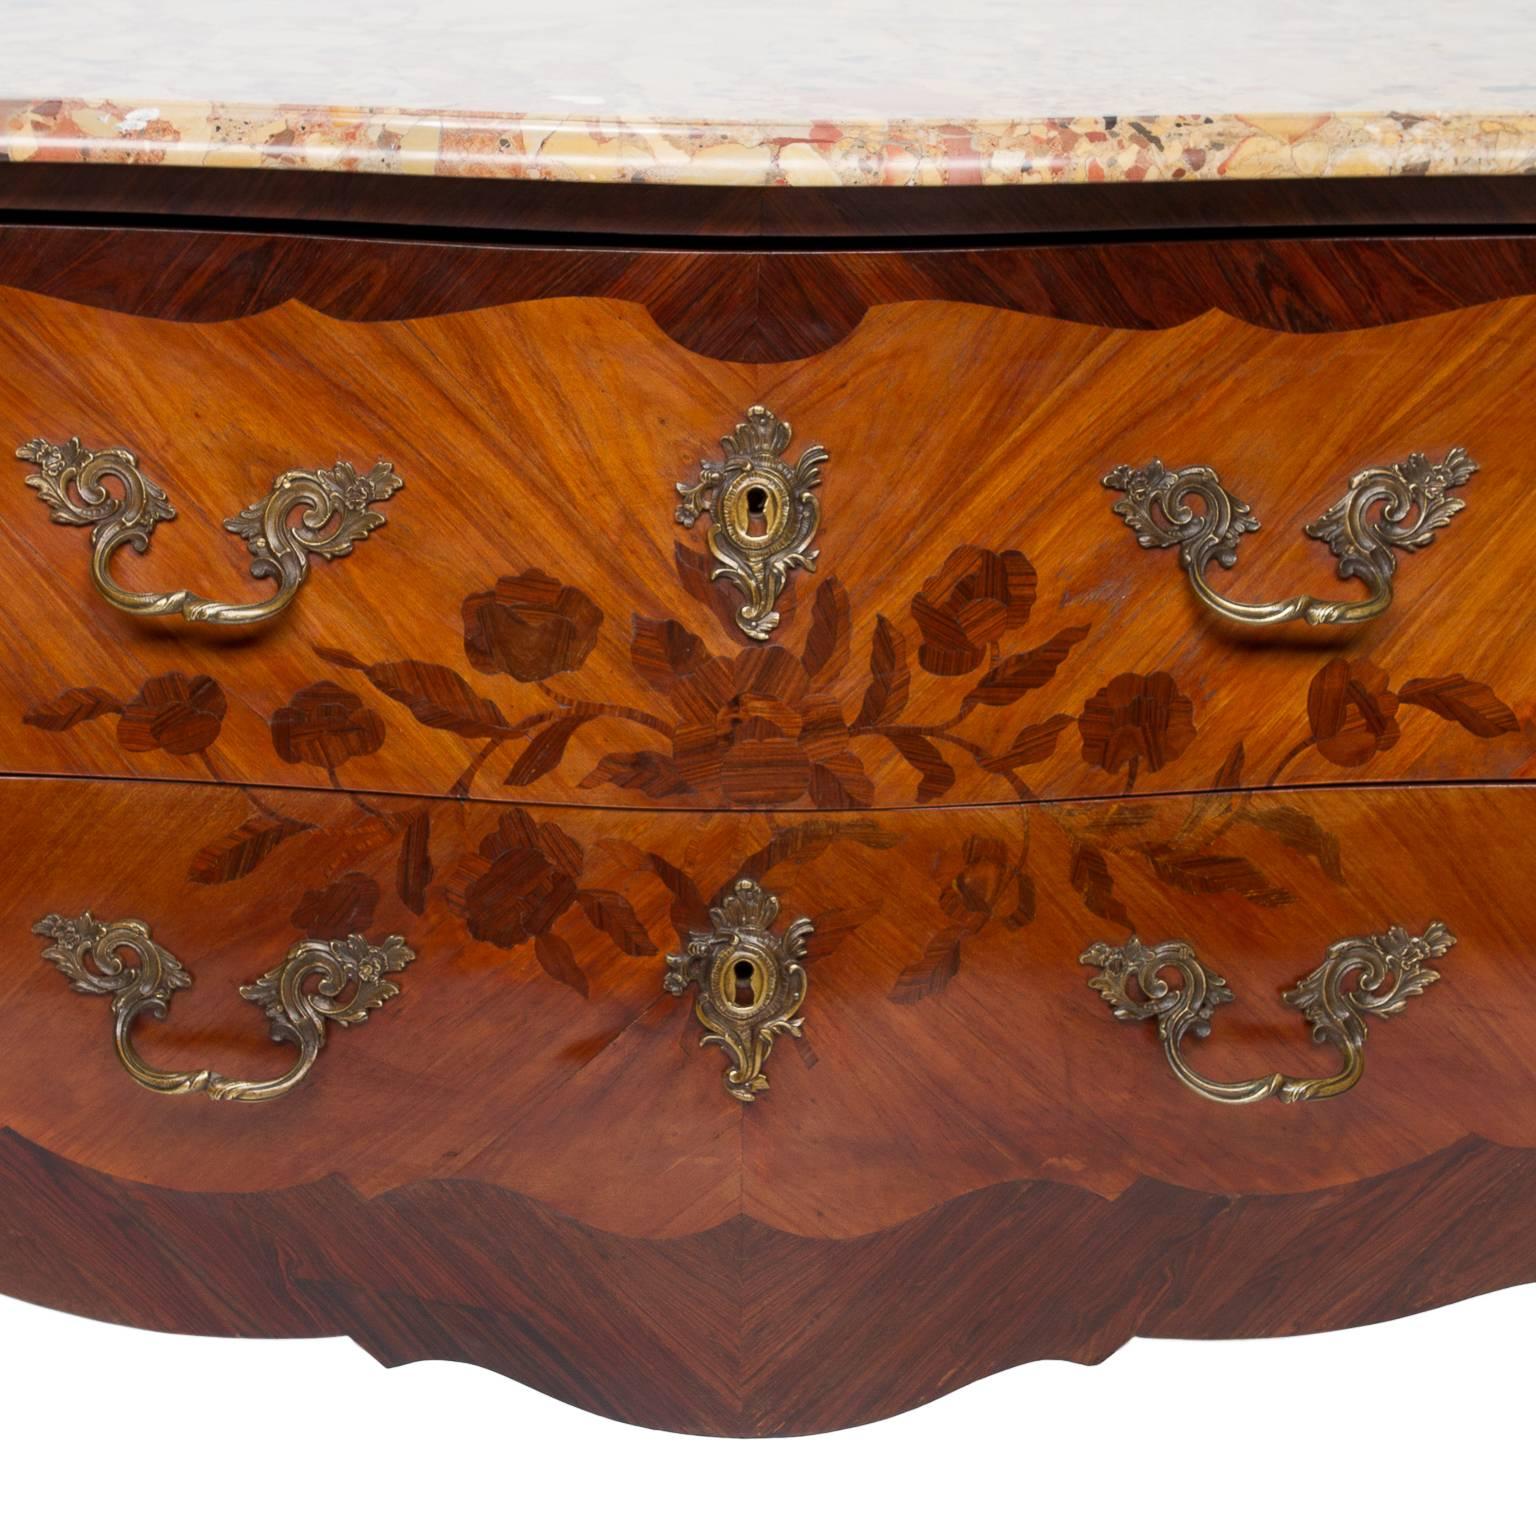 A fine Louis XV marble-top bombé inlaid commode with bronze hardware. There are two drawers and each inlaid with floral design. The commode is inlaid on each side of the commode and broken up by the shape and bronze mounts to the corners. Beautiful